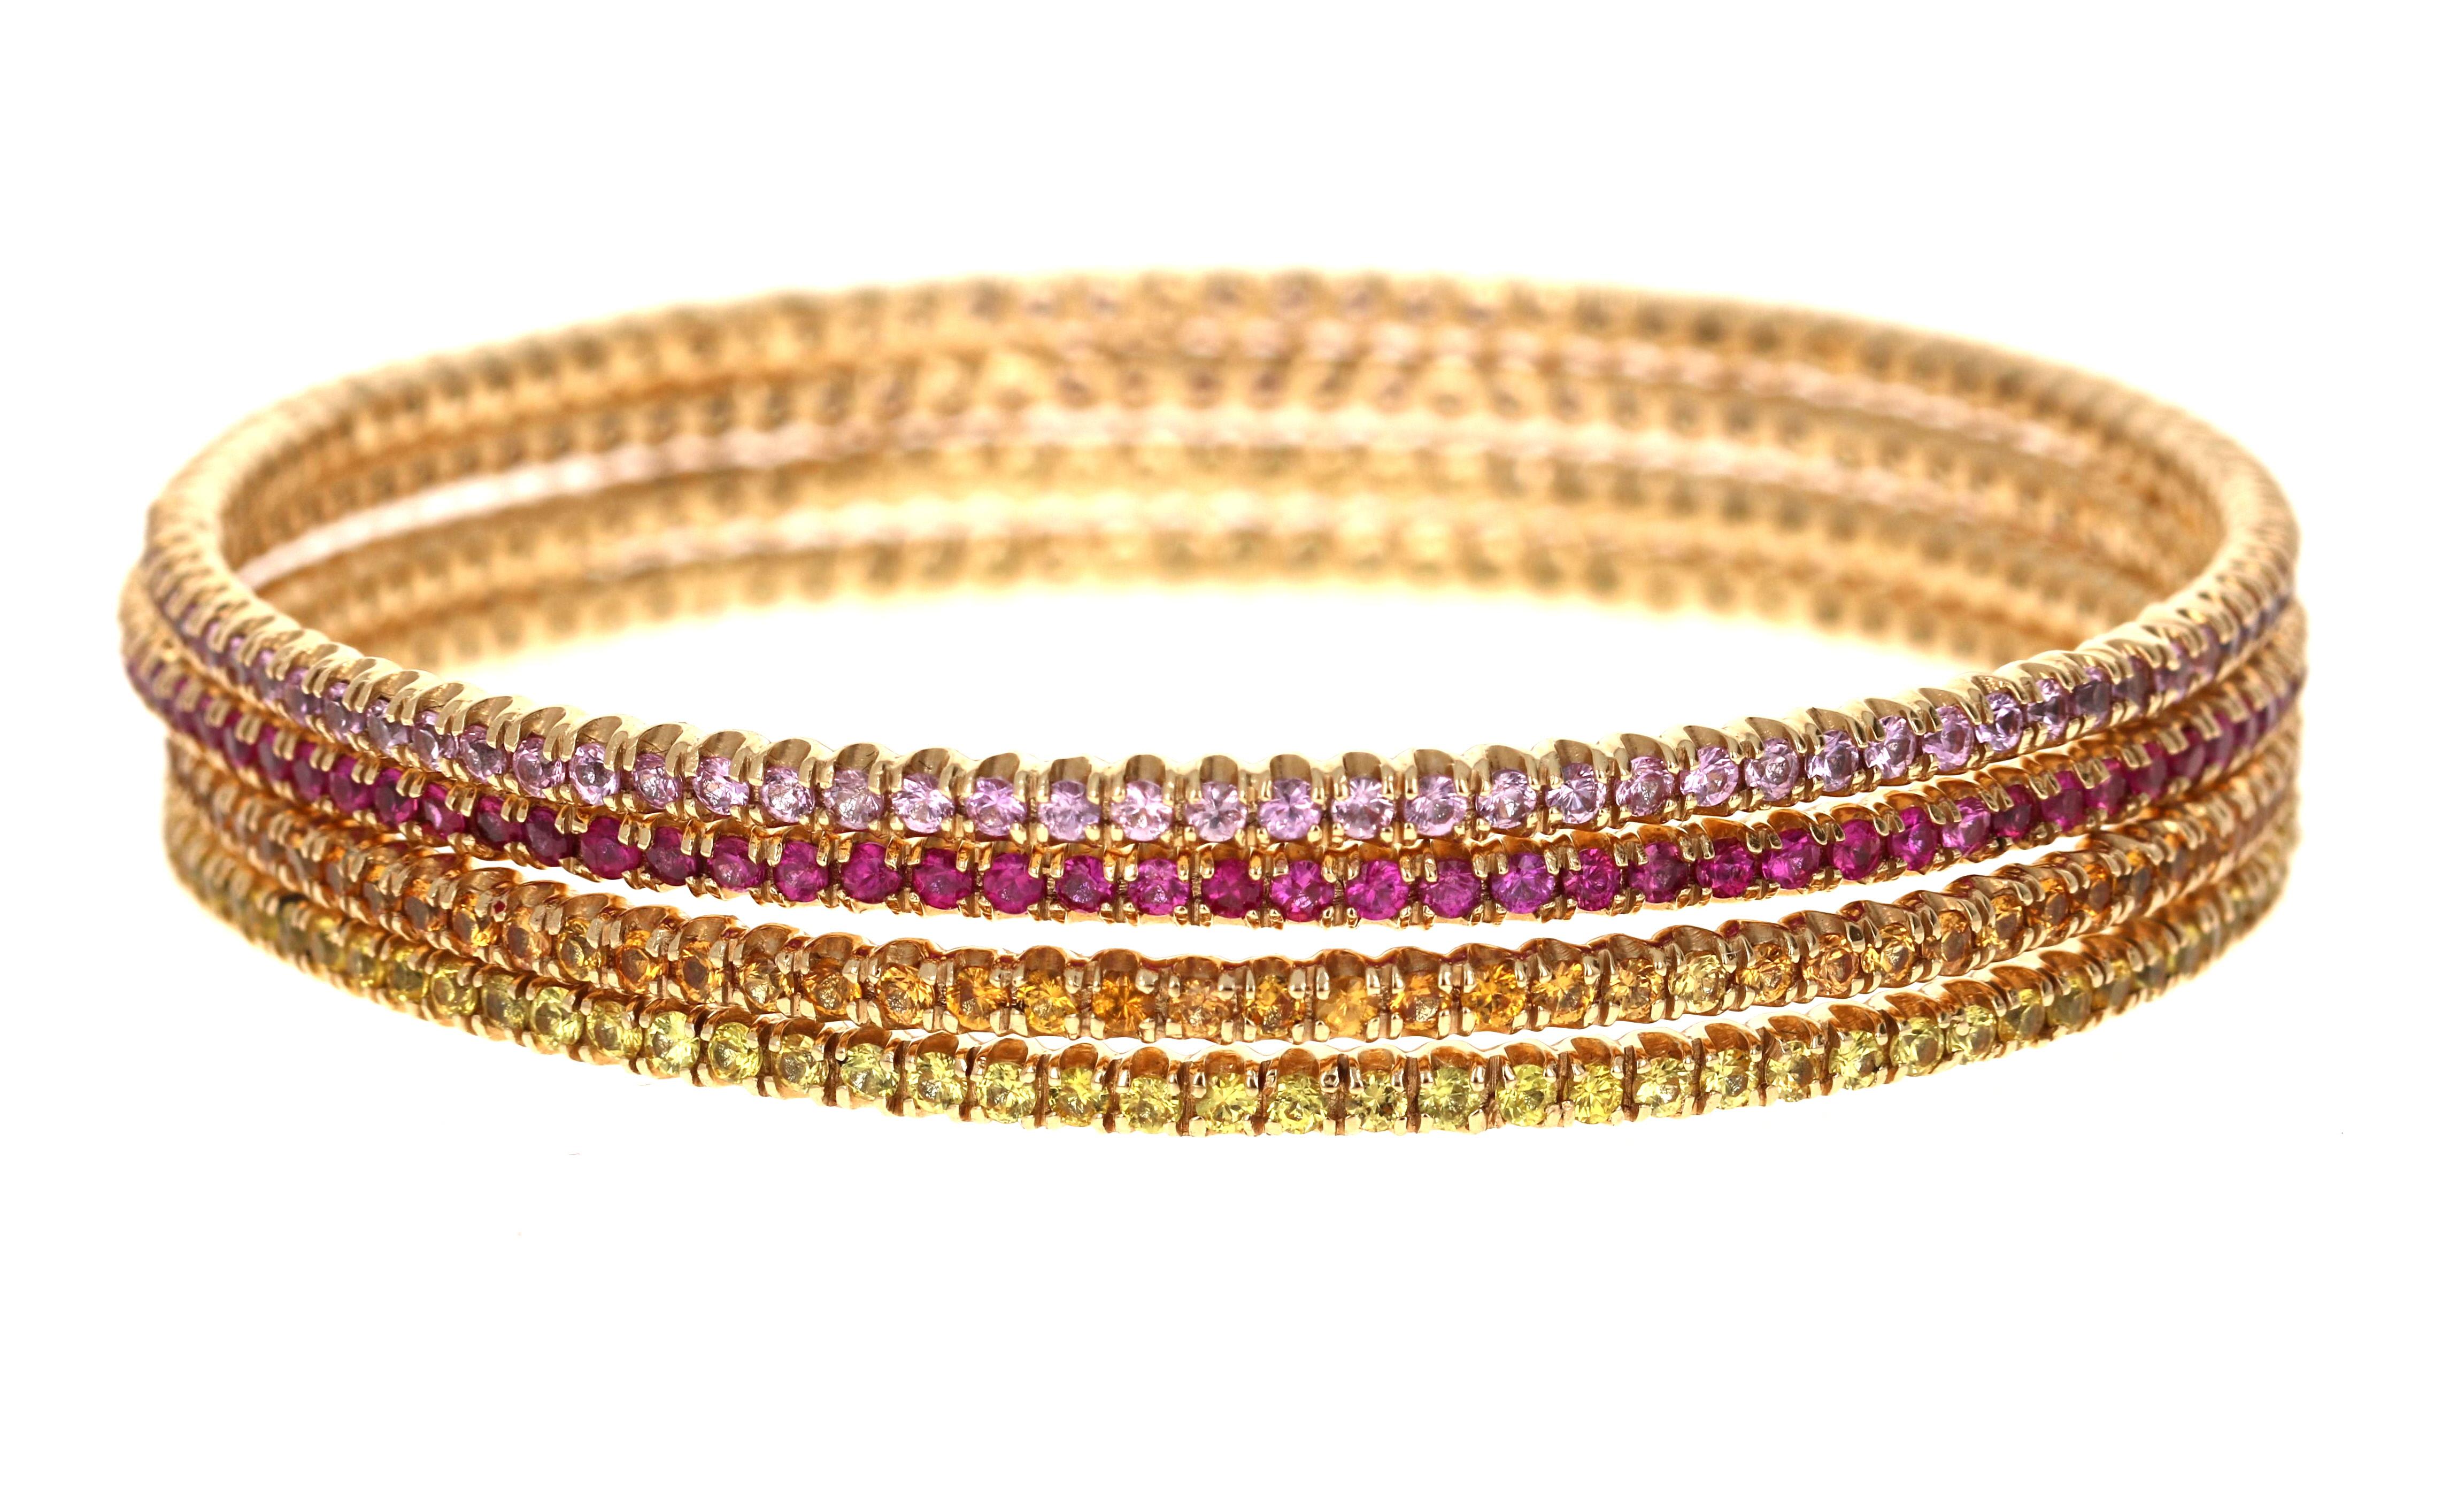 12.05 Carats Round Cut Pink Sapphire, Yellow Sapphire and Orange Sapphire Yellow Gold Stackable Bangles!

Set of 4 elegant and classy 12.05 Carat Sapphire Stack-able, Eternity Bangles that are sure to be a great addition to your accessory